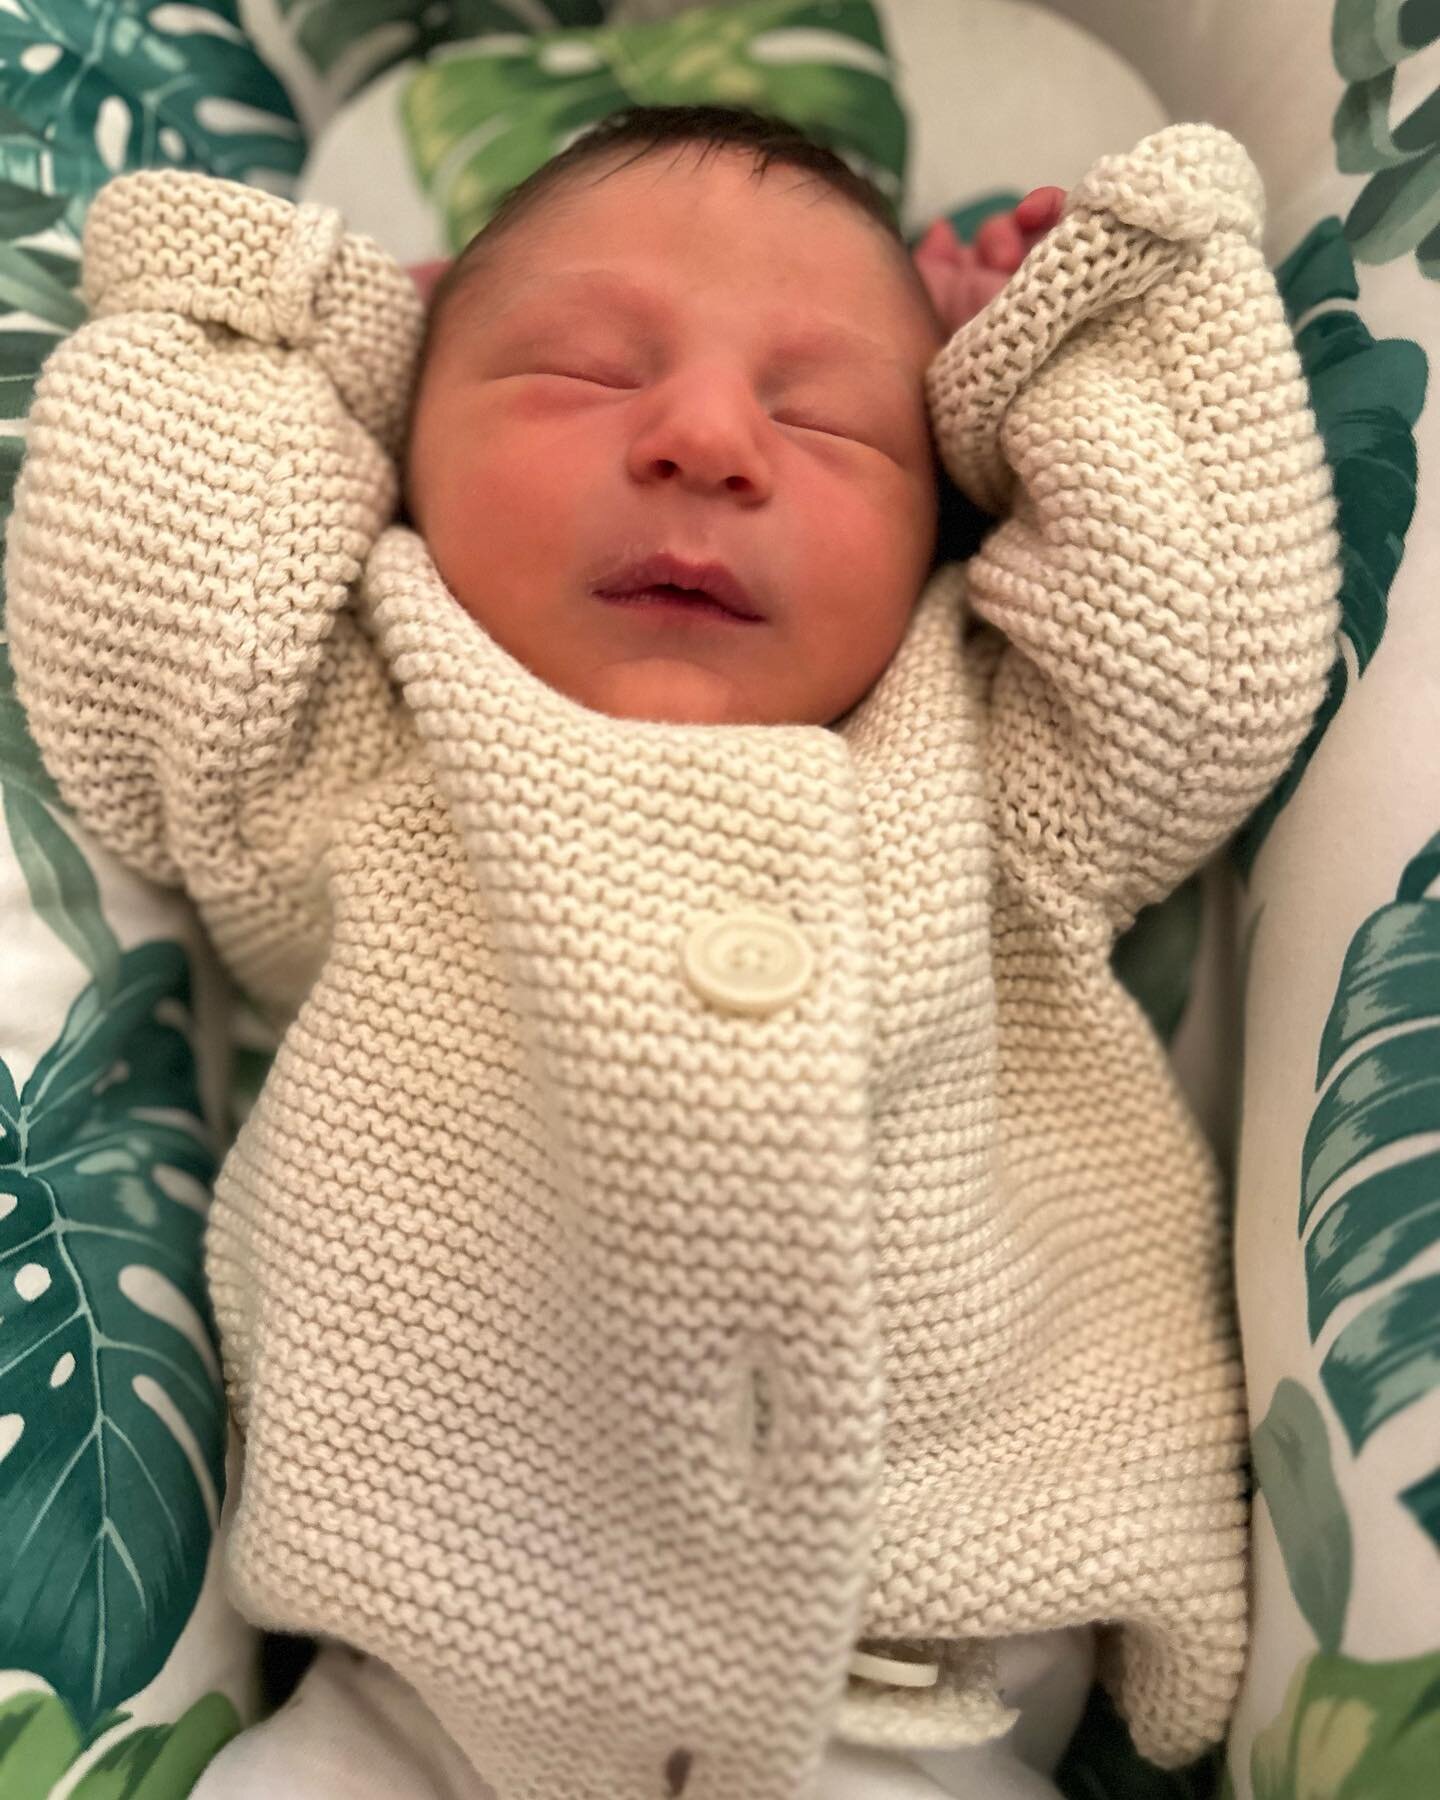 Our sweet Juno Jude ❤️
.
Who joined our world on 10/30 at 11:22pm, just shy of a Halloween entrance 🎃 
.
The hugest thanks to our incredible birth team @centralparkmidwifery and the best doula @wealthyapple . We felt so loved, supported, and strong 